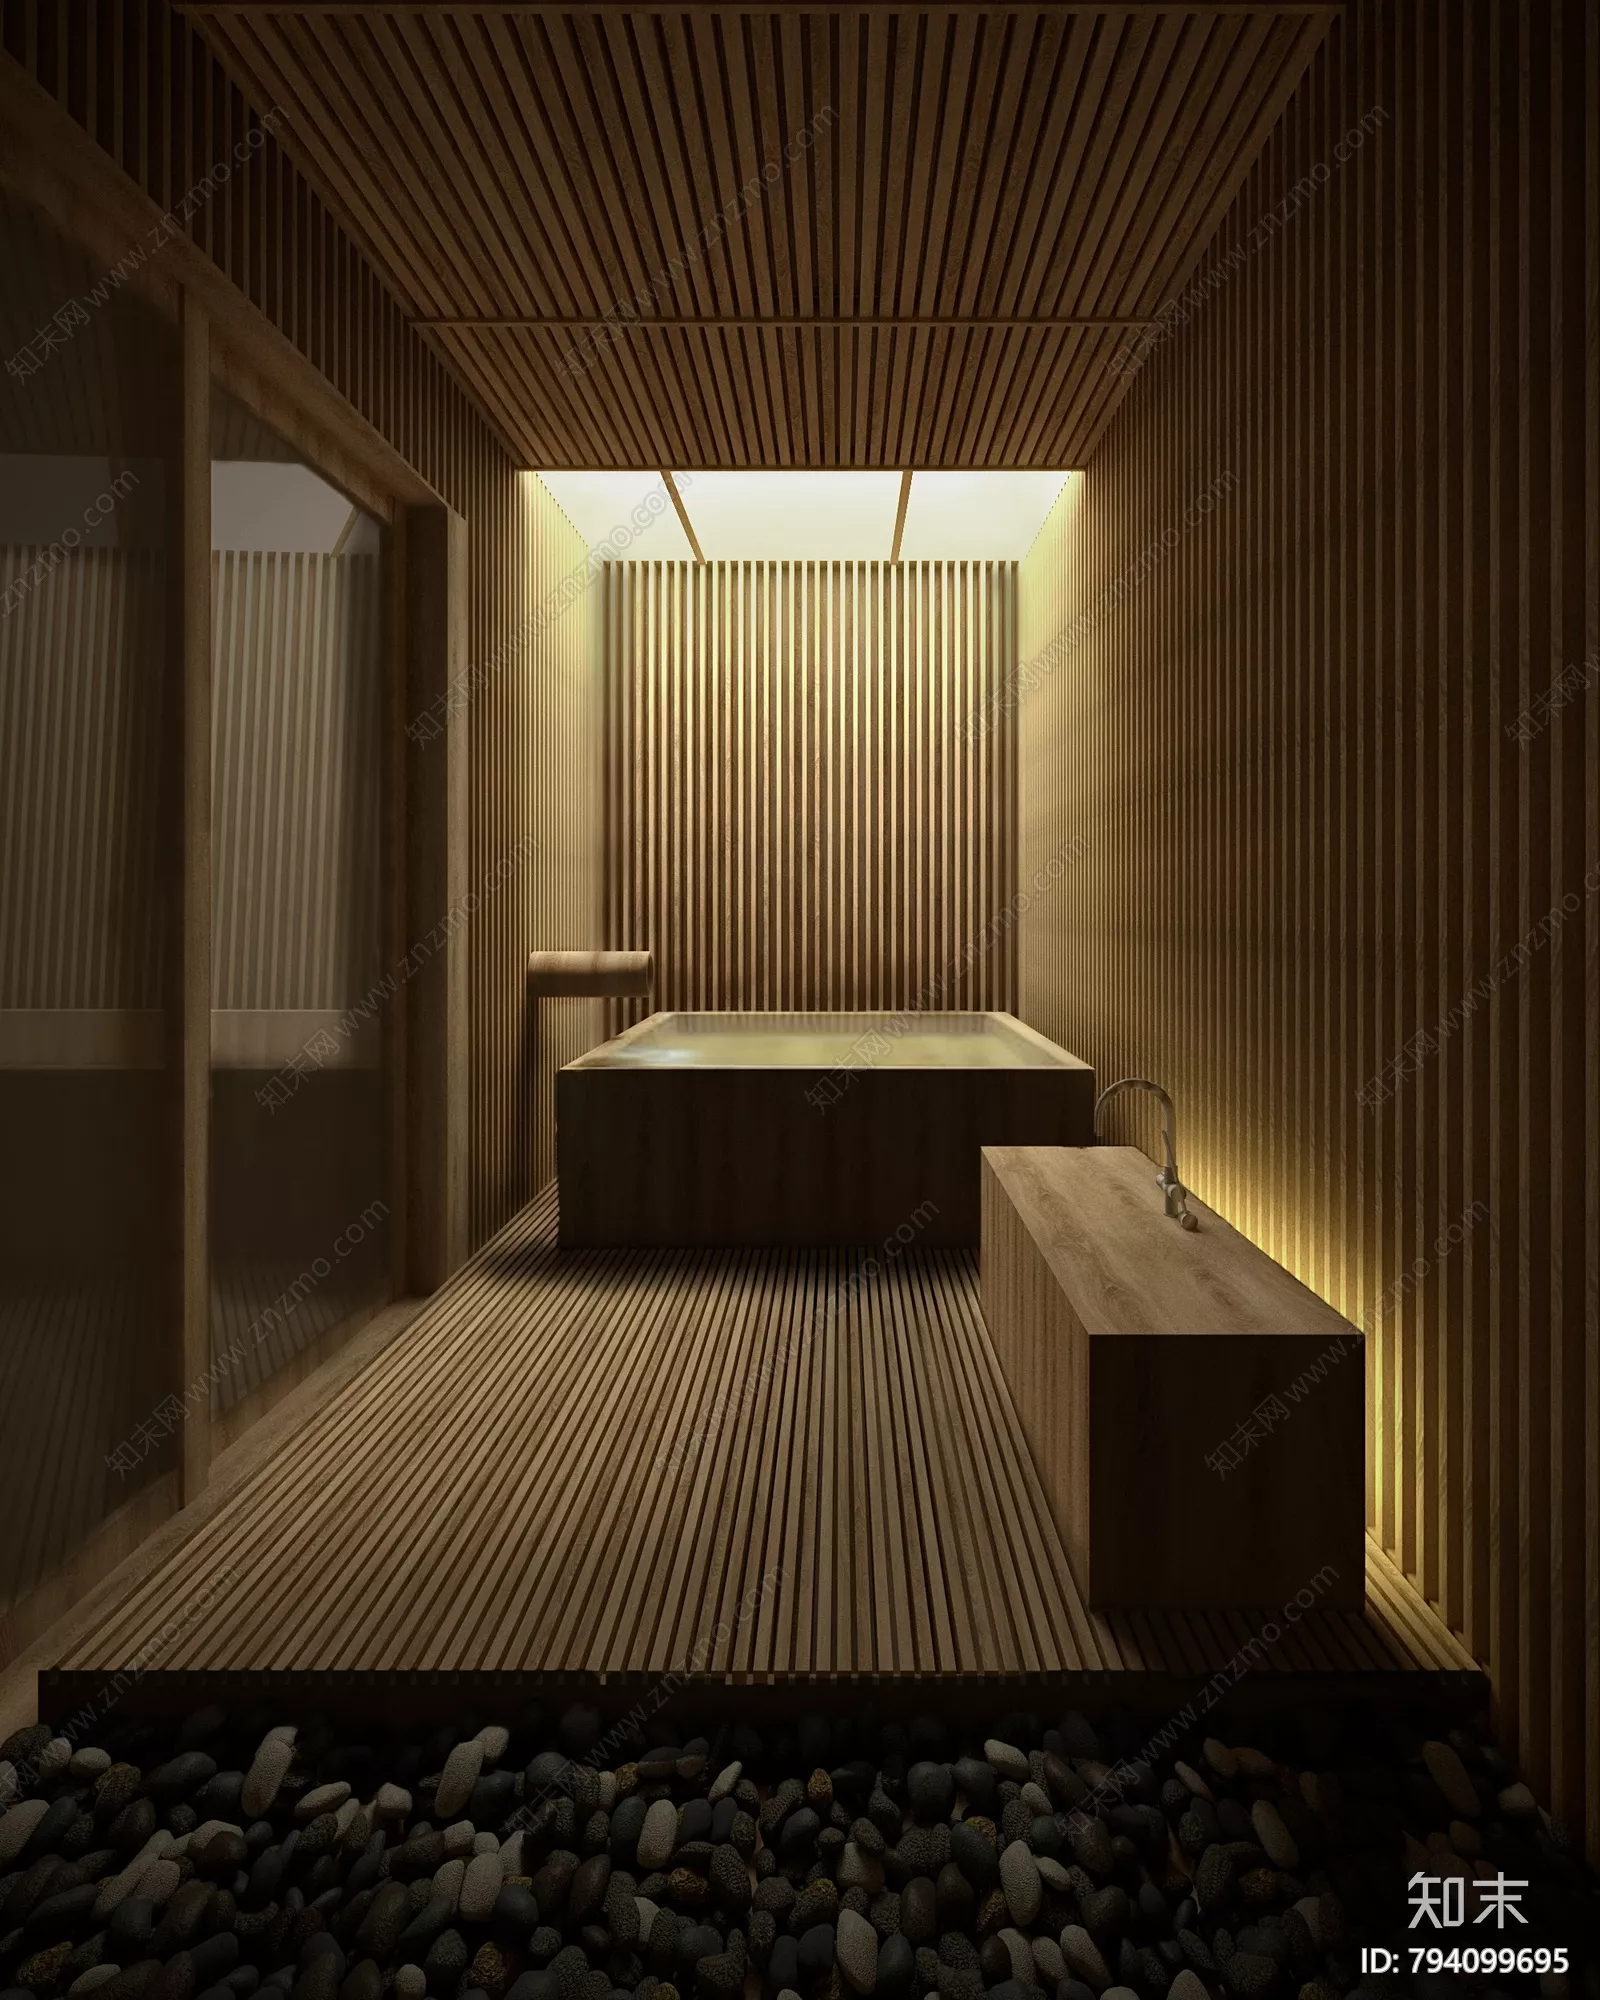 MODERN SPA AND BEAUTY - SKETCHUP 3D SCENE - VRAY OR ENSCAPE - ID13894